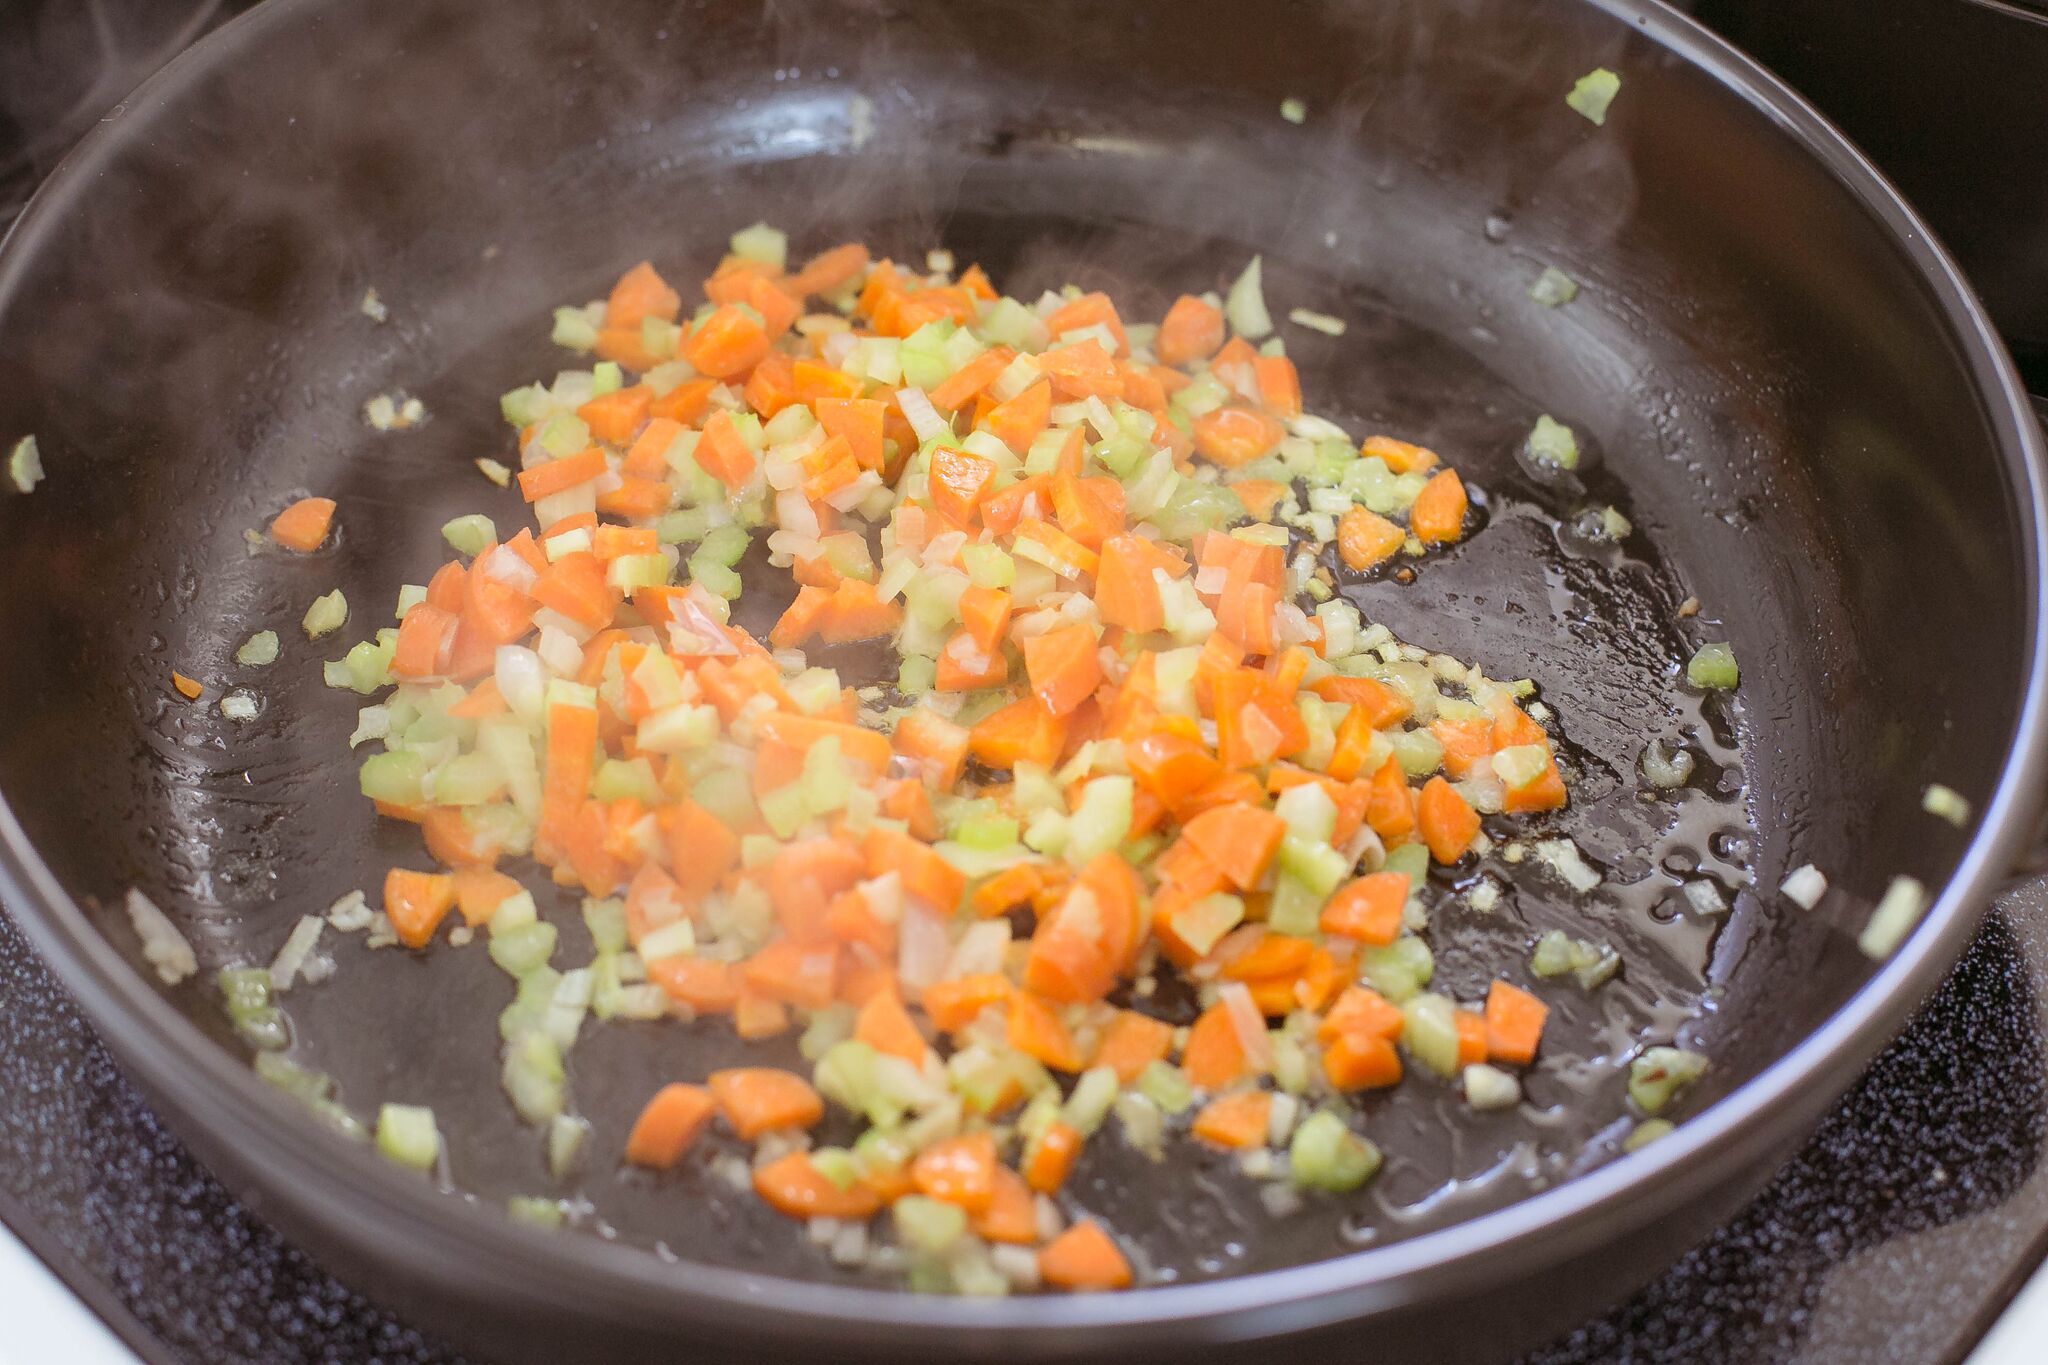 Melt butter in a saucepan over medium-high; add shallots, carrot, and onion and cook. 